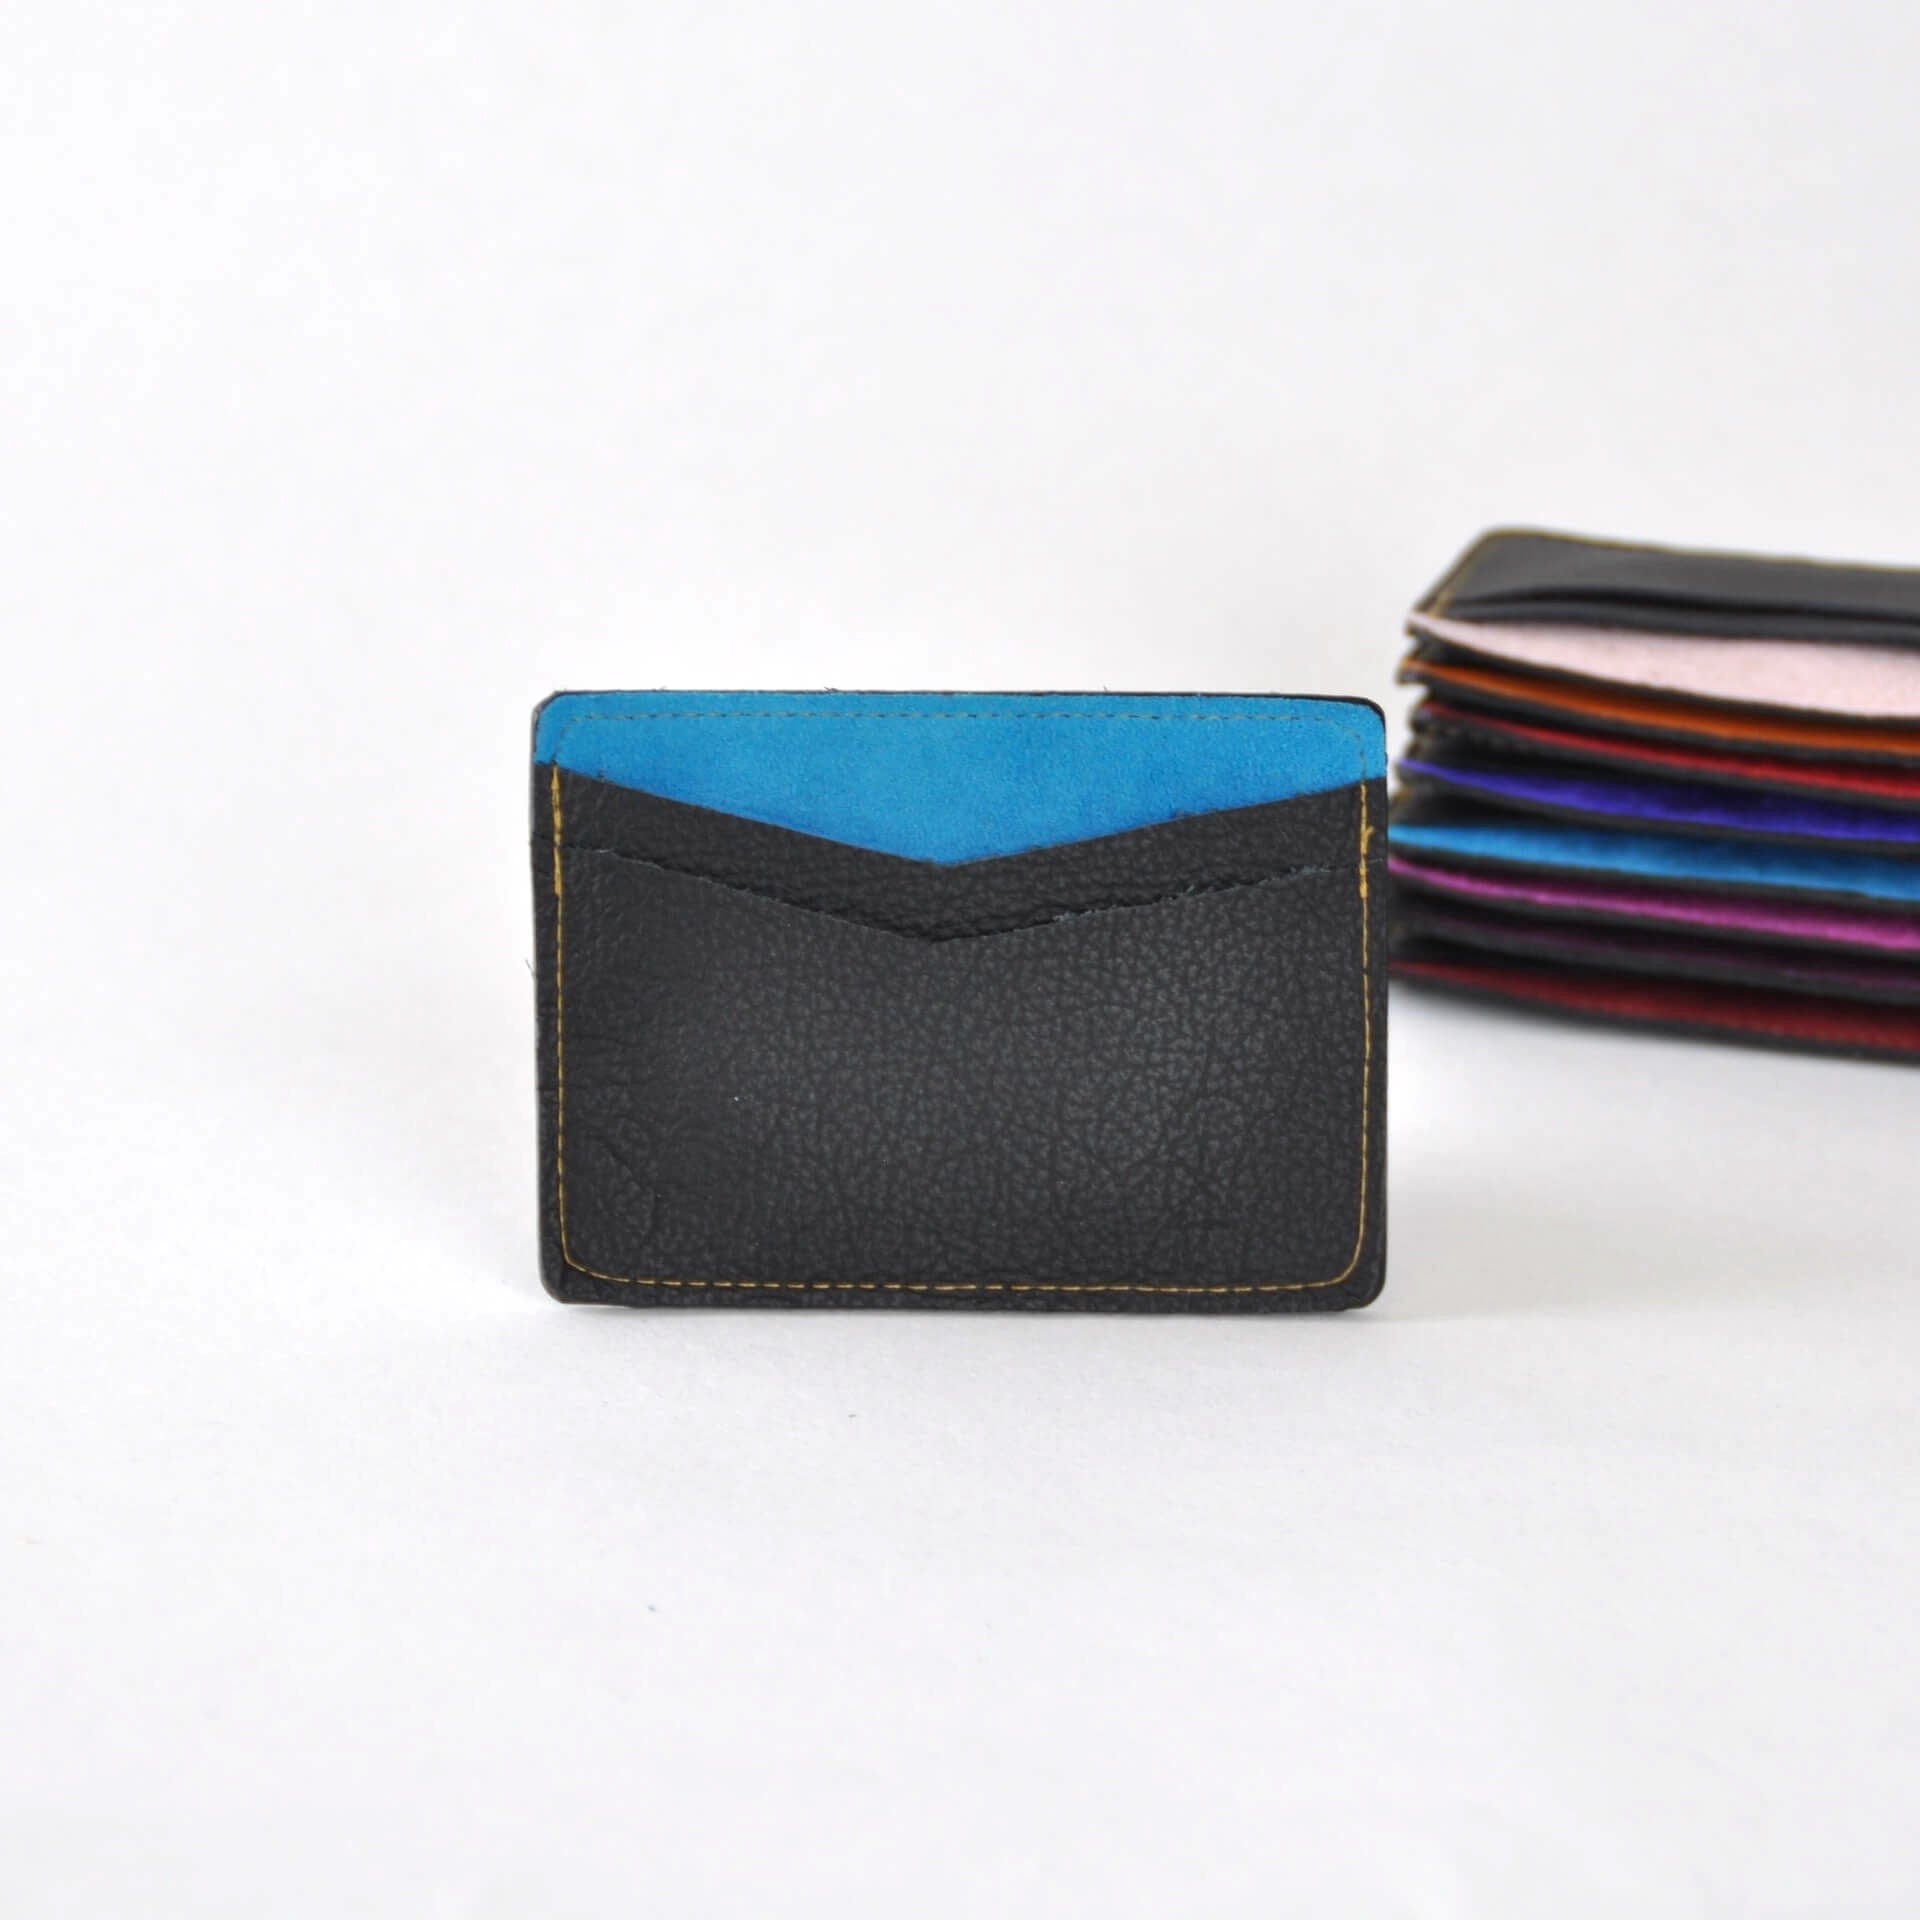 Zoe Dunn Designs Purse / Wallet Black / Sky Blue Card Holder - Recycled Leather